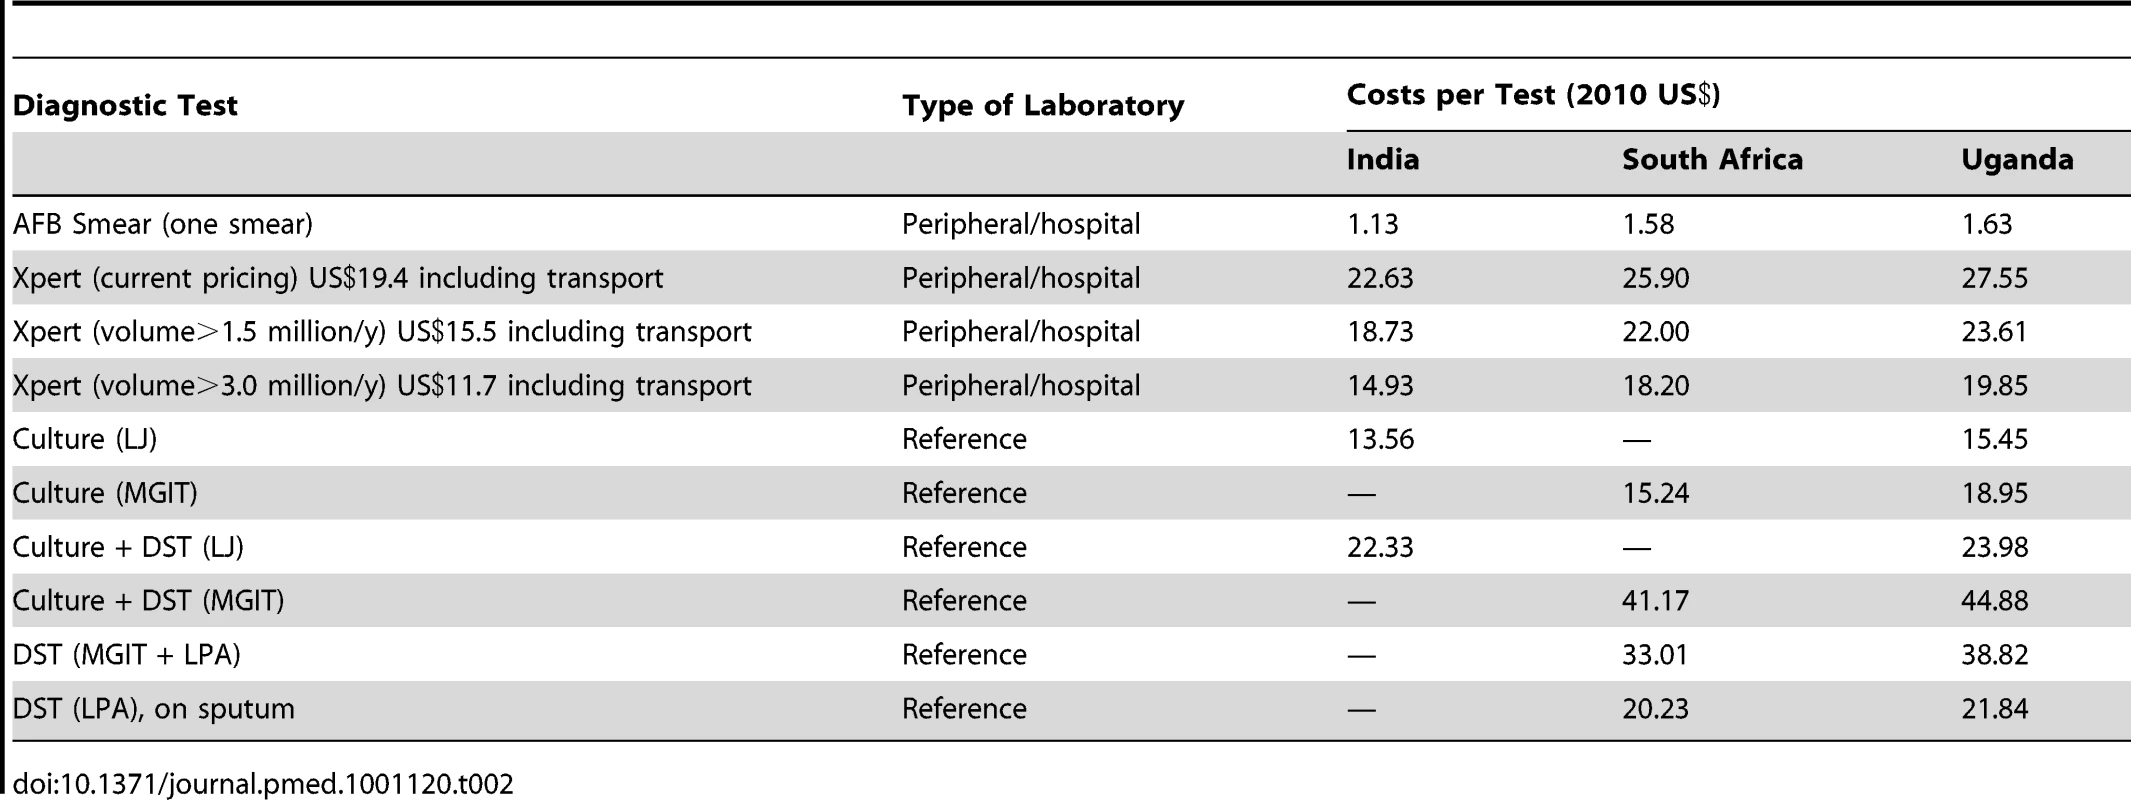 Cost of diagnostic tests at the study sites (2010 US$).